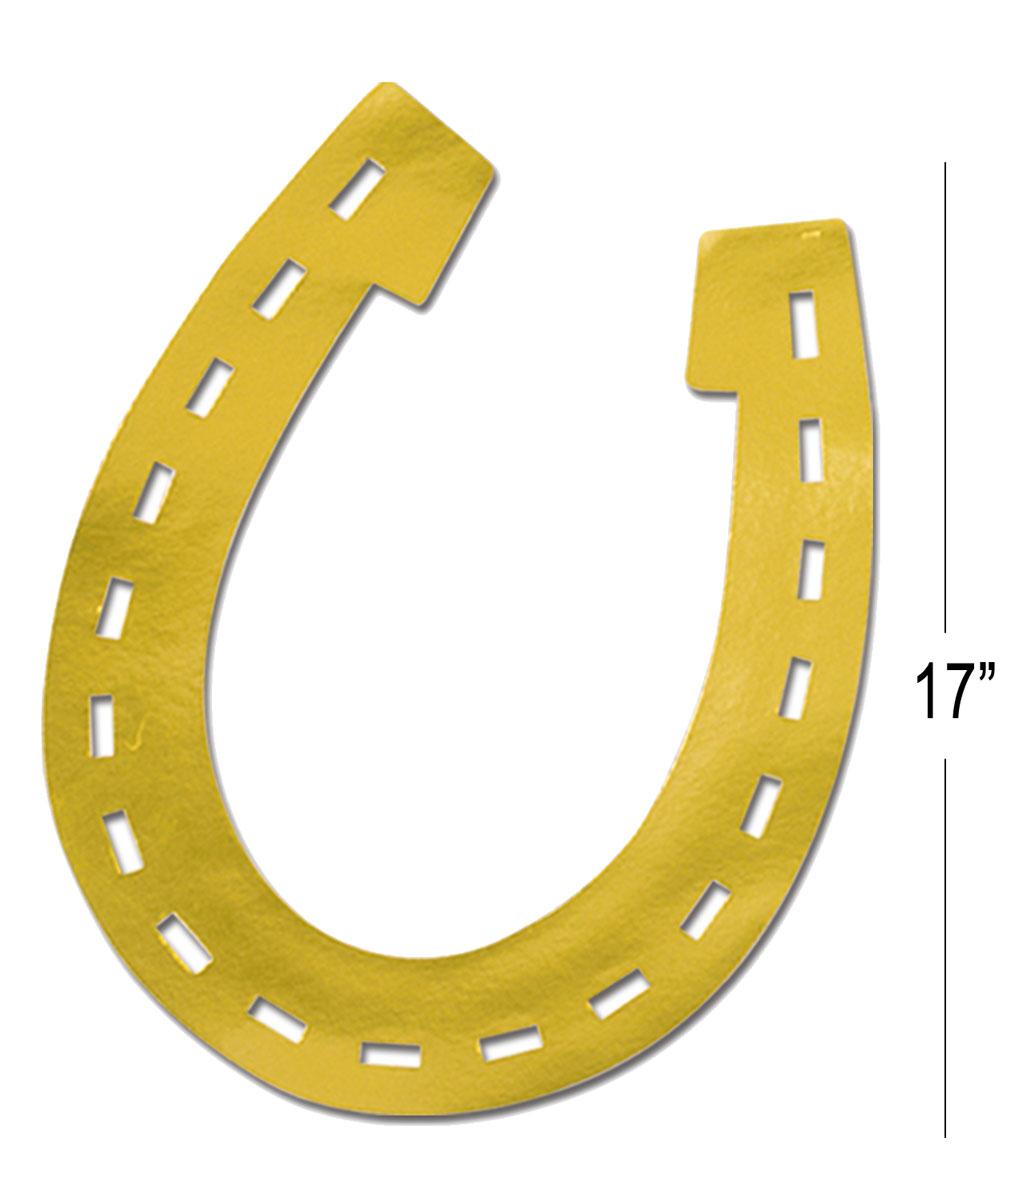 Foil Horseshoe Silhoutte Cutout. 17" gold foil on both sides by Beistle 55971 and available in the UK here at Karnival Costumes online party shop